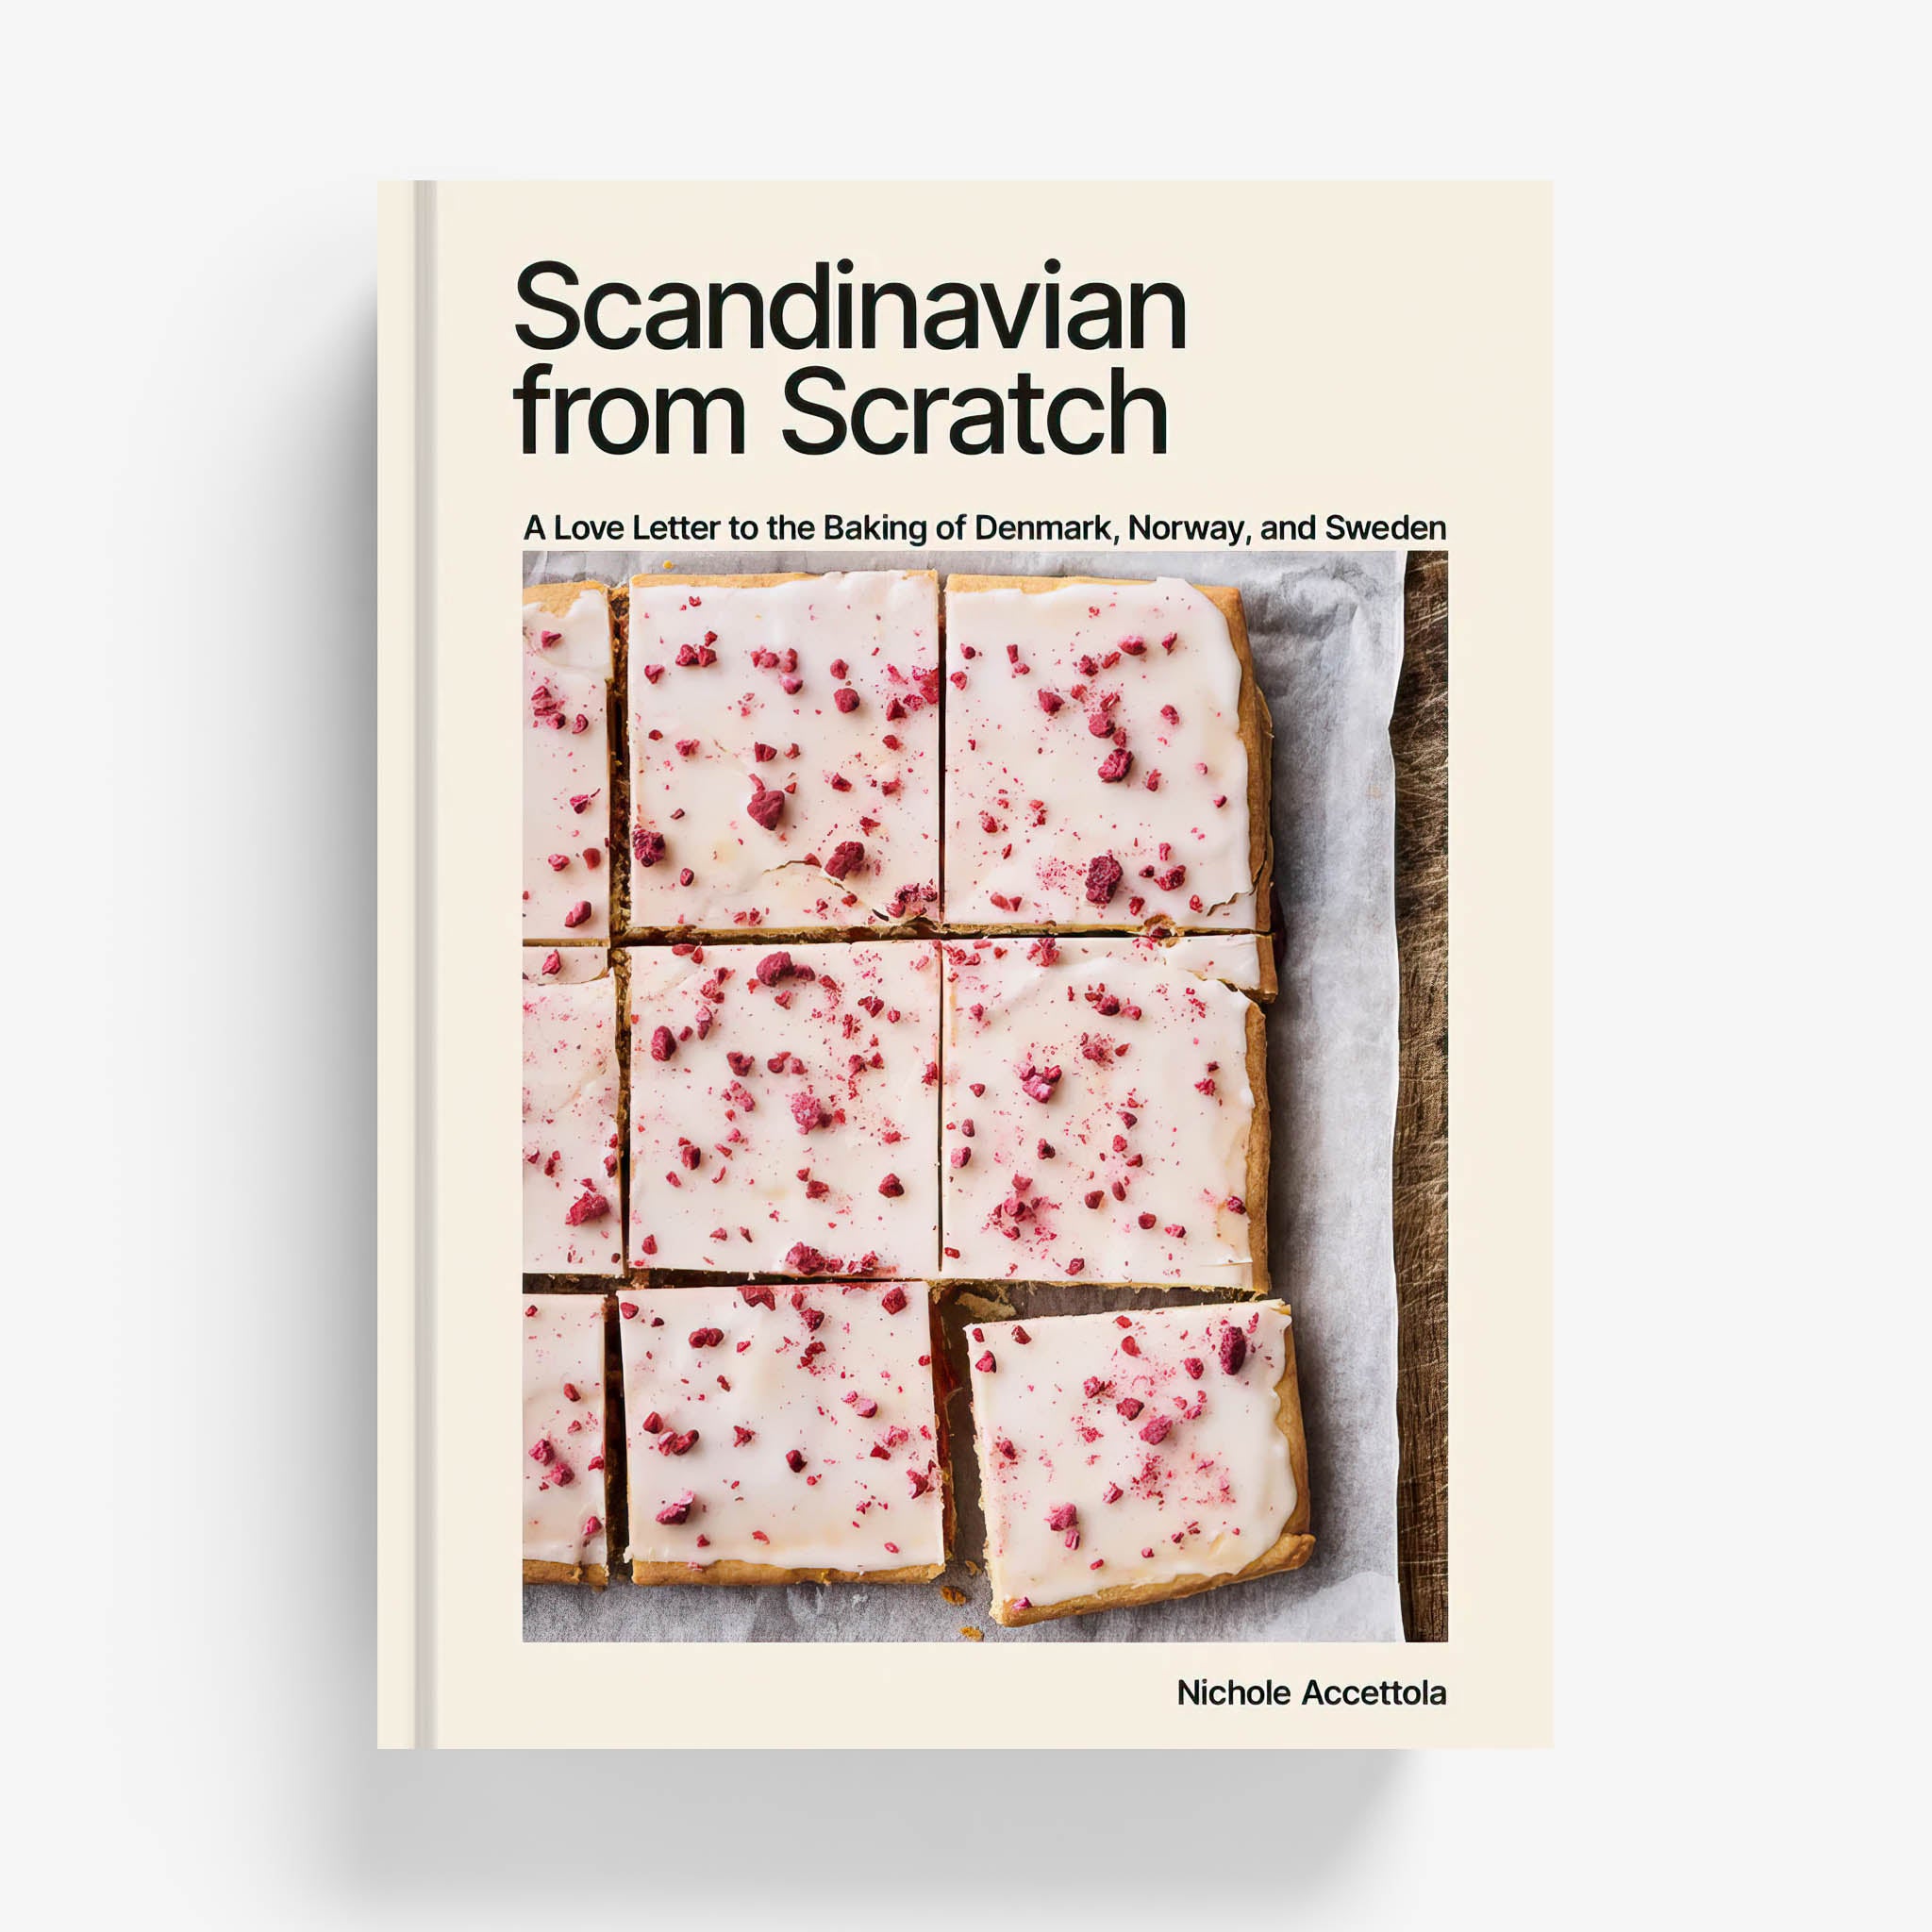 Scandinavian From Scratch by Nichole Accettola